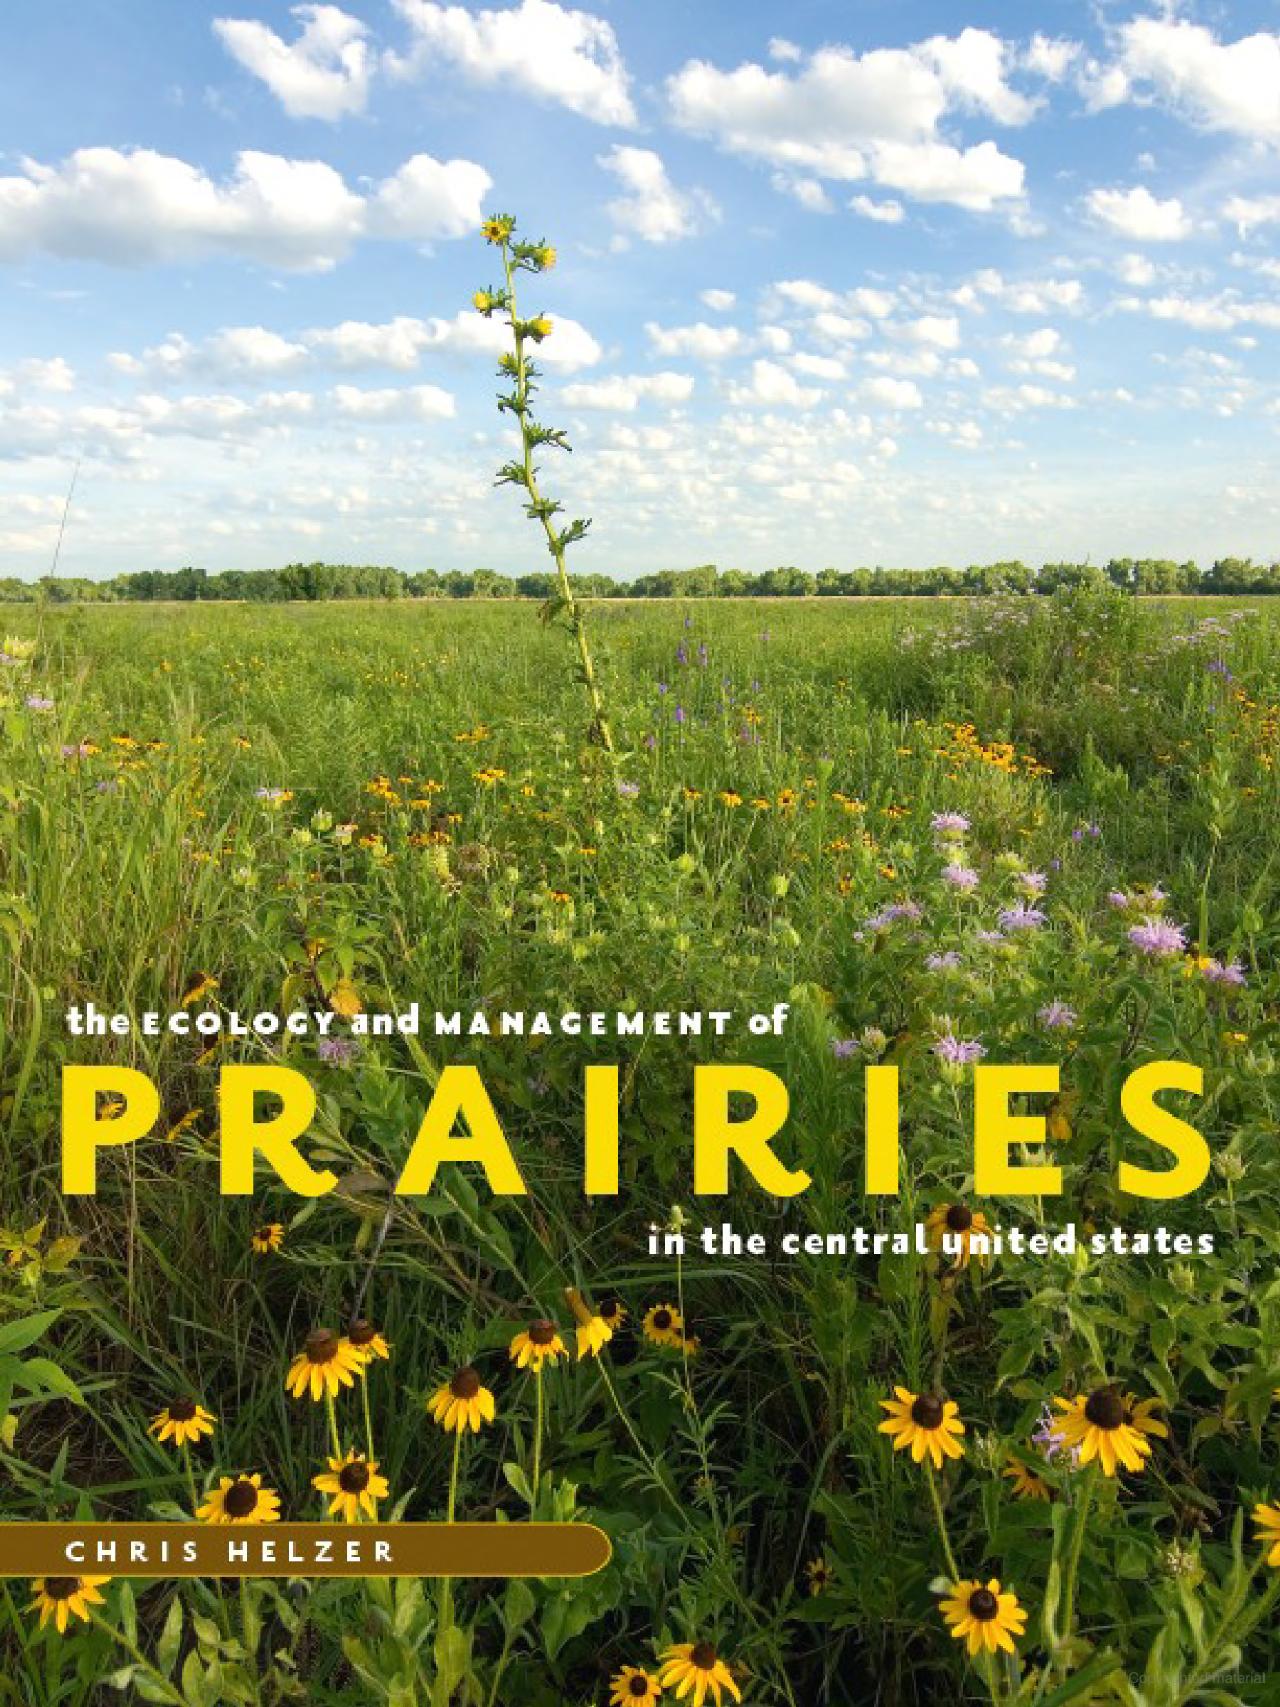 the Ecology and Management of Prairies